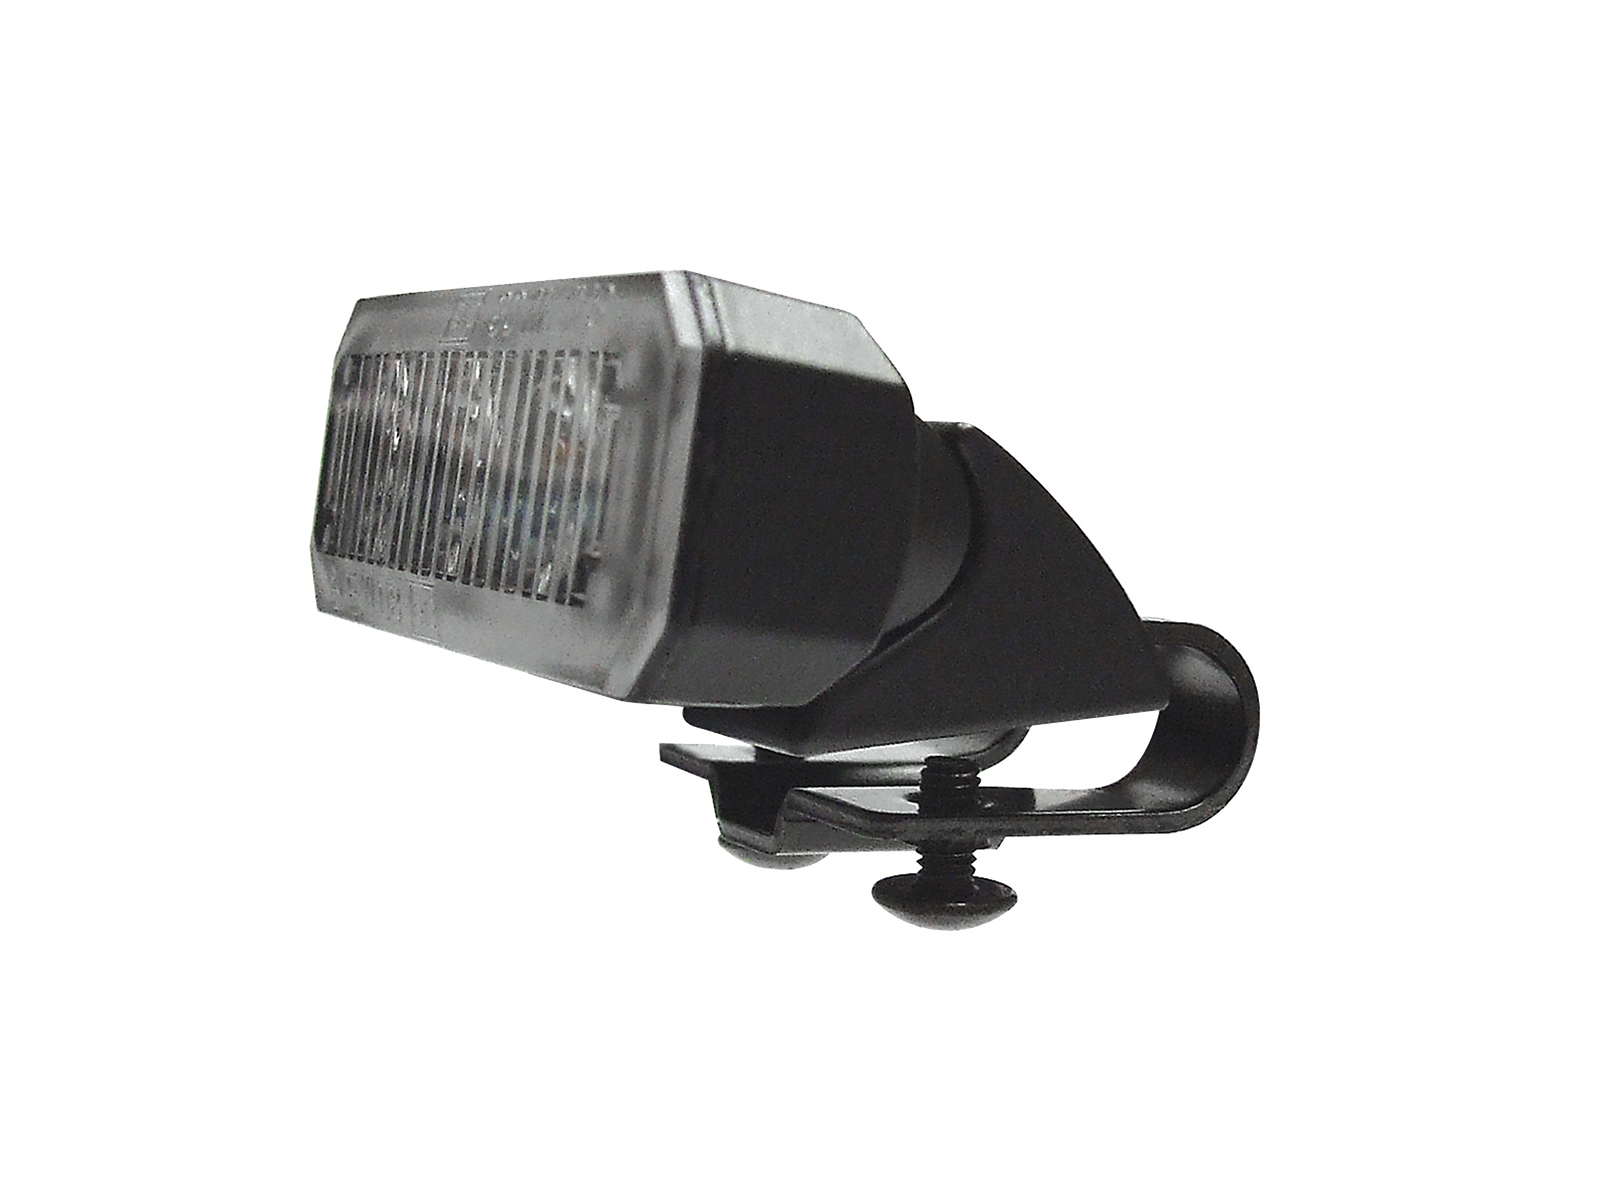 Mini Stealth - 3-way Flush Fit (Hood Mount) LED Modules for Horizontal Mounting Angle View with Bracket